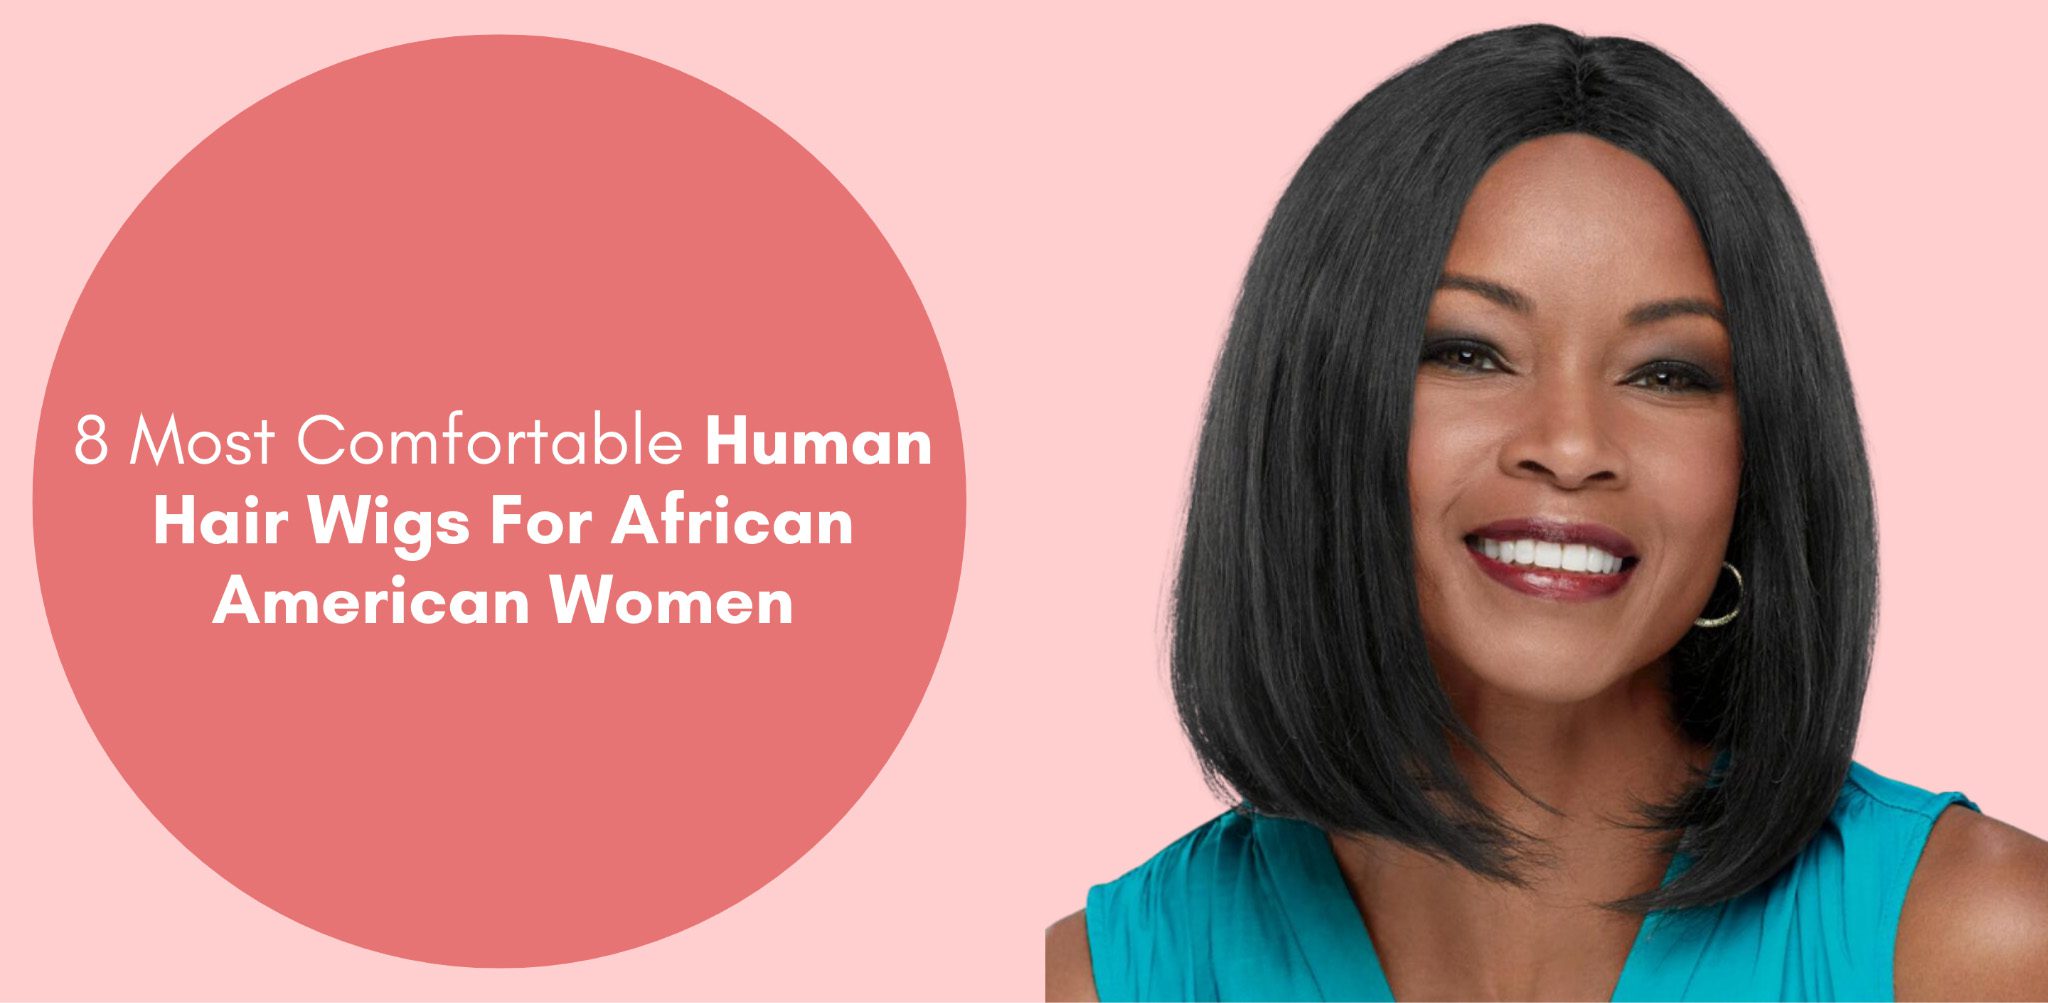 8 Most Comfortable Human Hair Wigs For African American Women